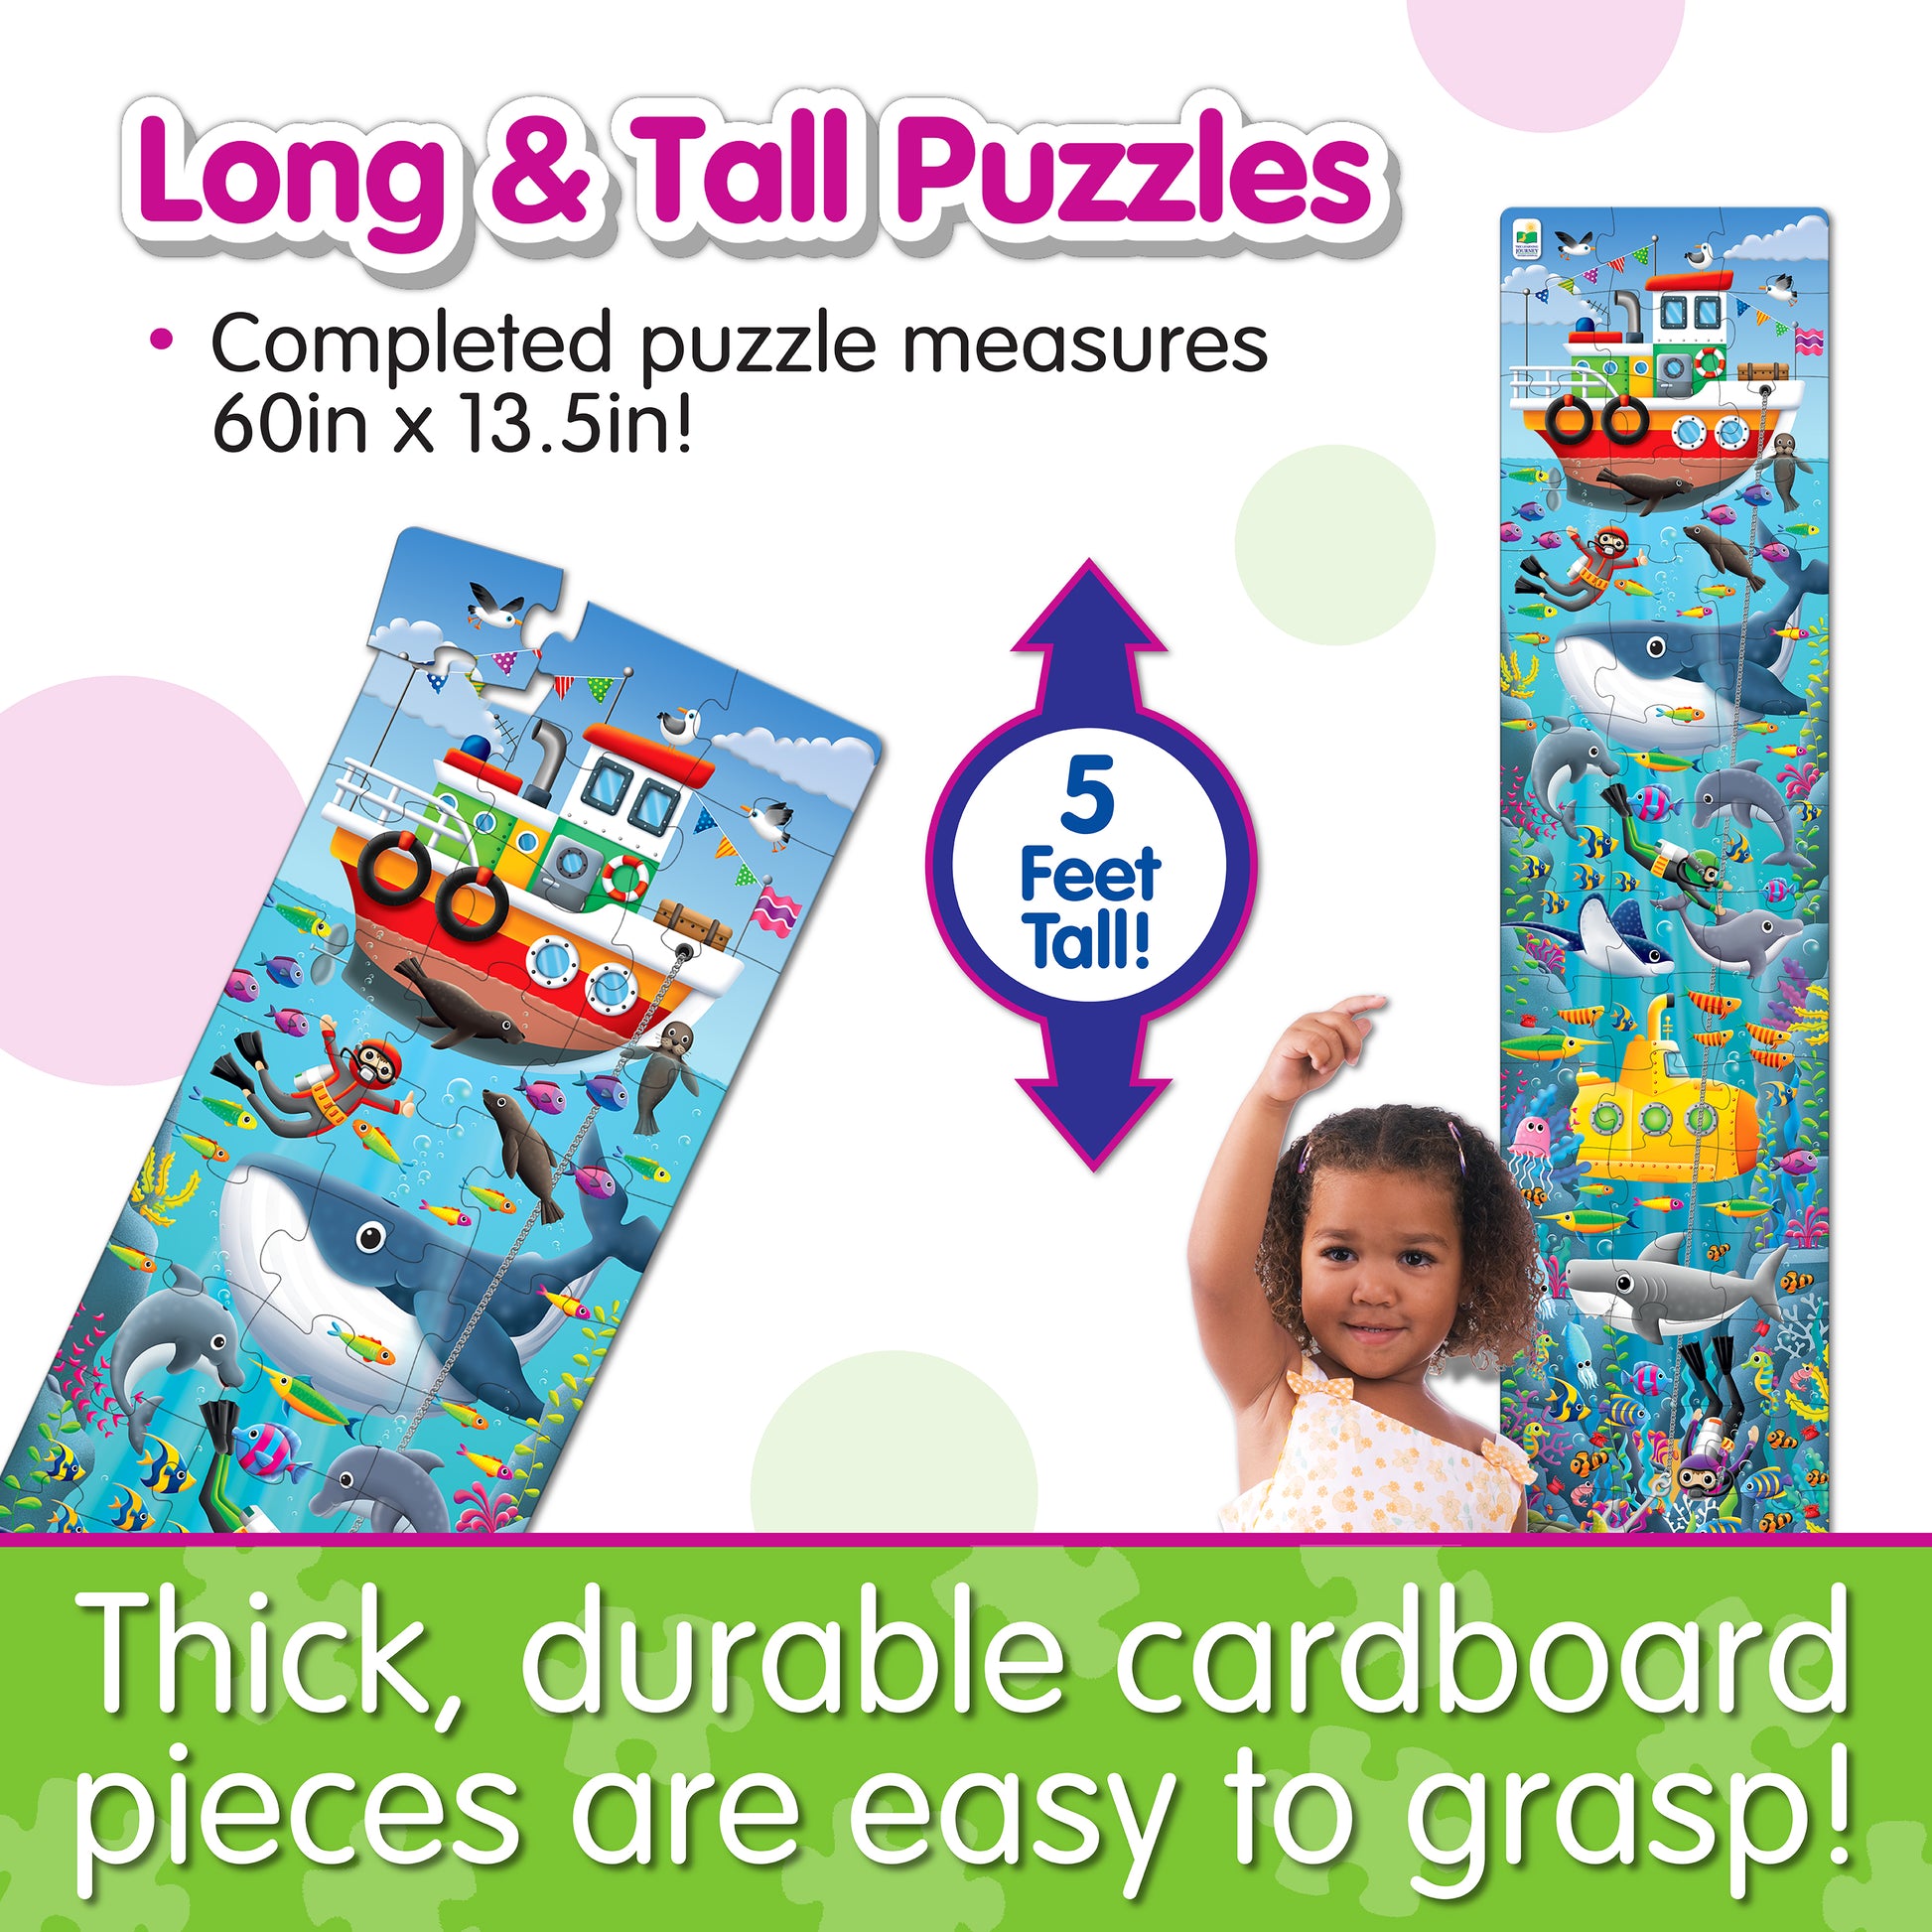 Infographic about Long and Tall Under The Sea Puzzle's features that says, "Thick, durable cardboard pieces are easy to grasp!"